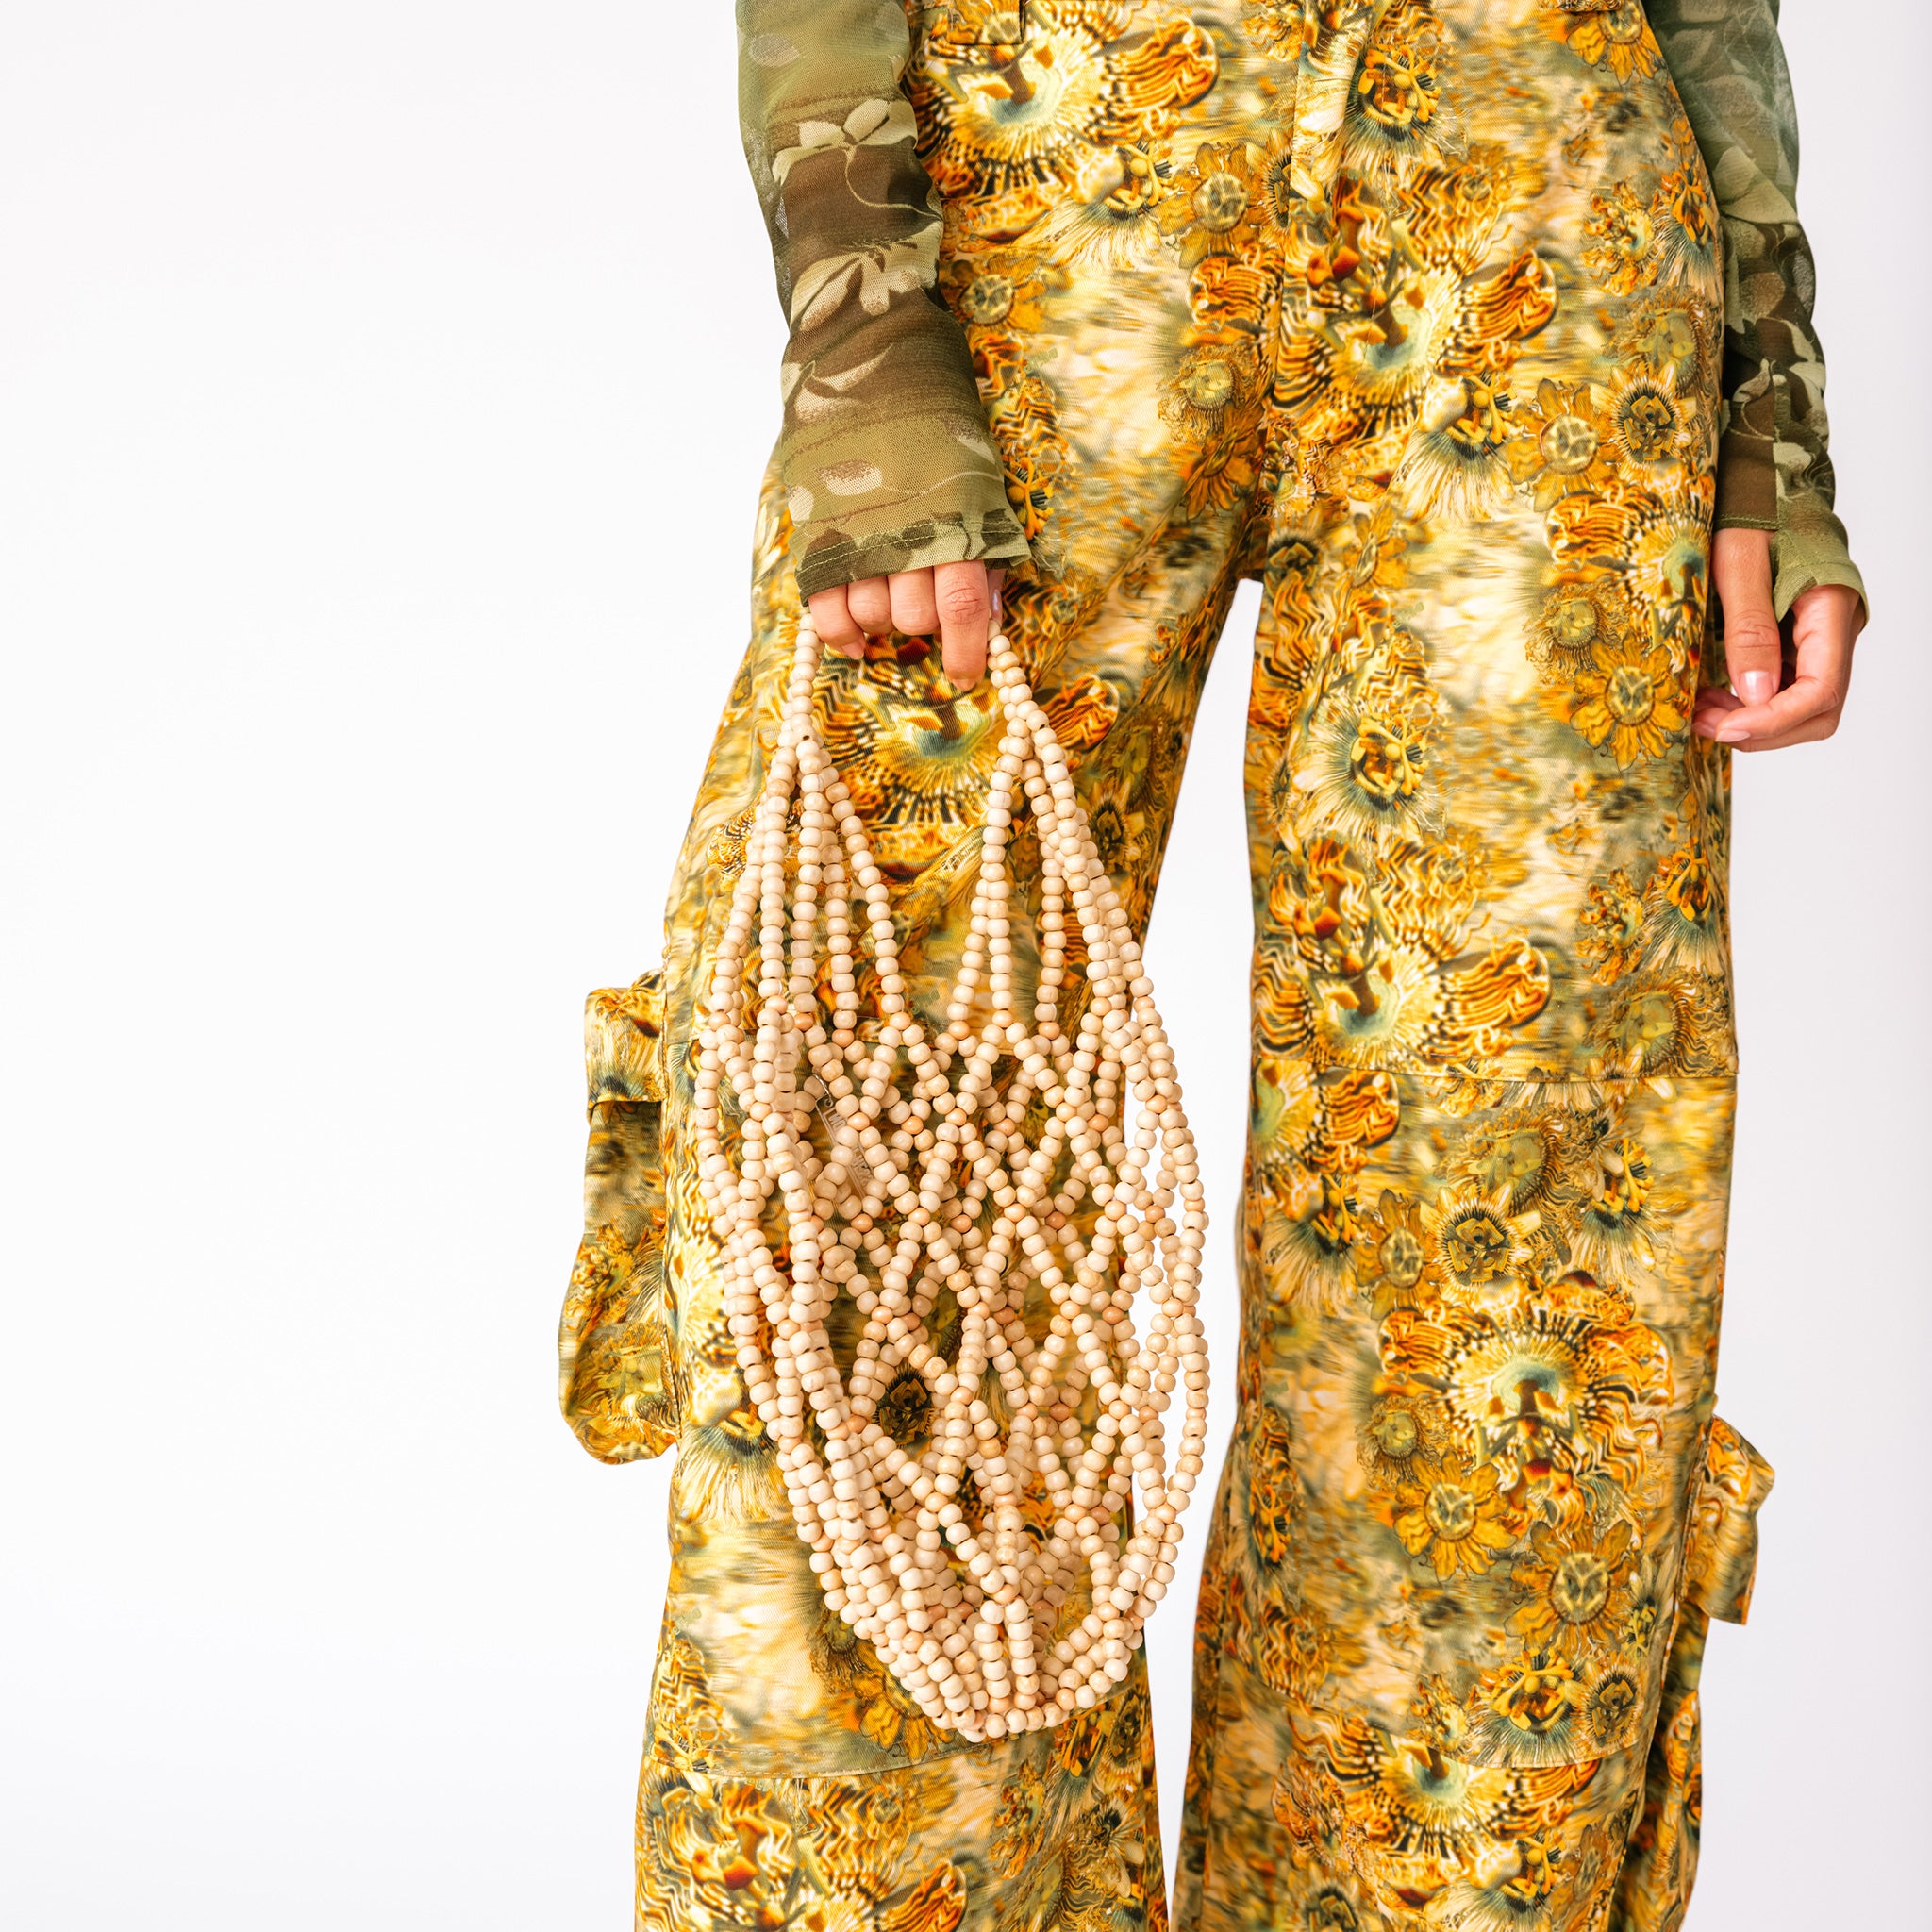 A model wears the brown and yellow floral printed Lawn Cargo Pants by Collina Strada with a mesh green long sleeved top - detail.